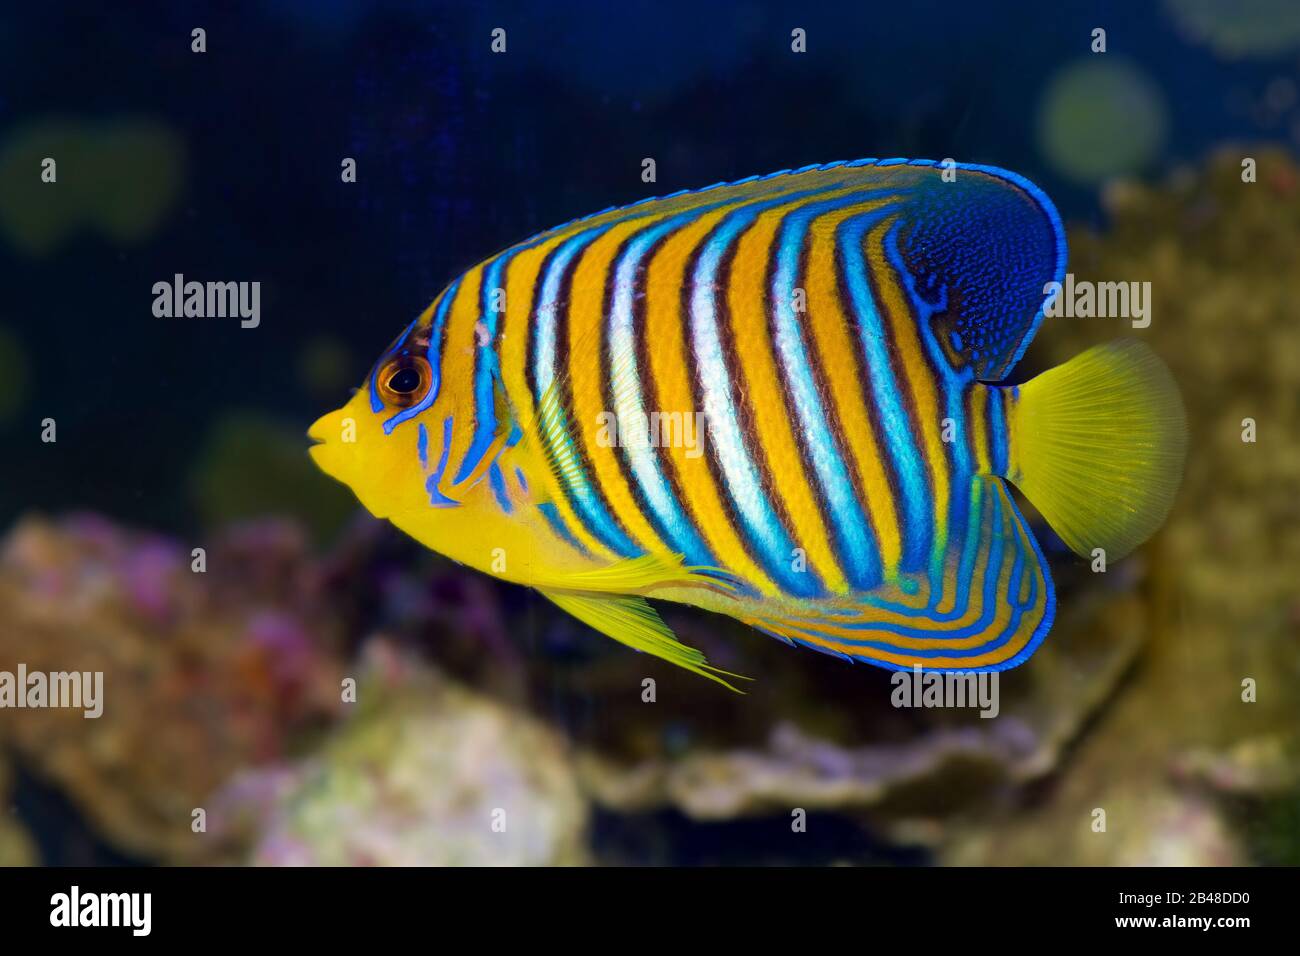 Regal Angelfish, Pygoplites diacanthus, a saltwater angelfish from the Indo-Pacific and Red Sea. This one has the coloring of the Red Sea/Indian Ocean Stock Photo